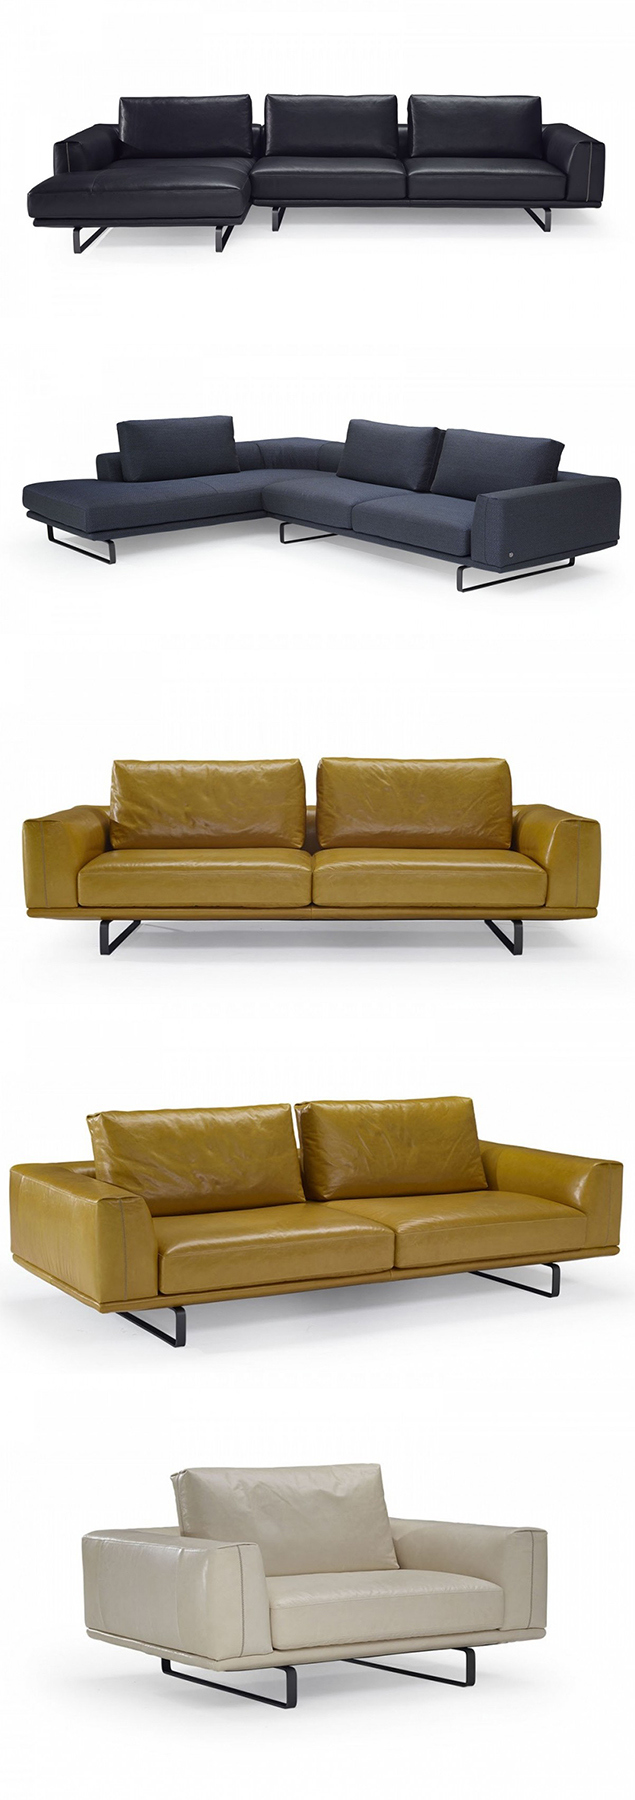 New Design Living Room Furniture Leather Sofa with Solid Wood Frame, Two Seat Sofa